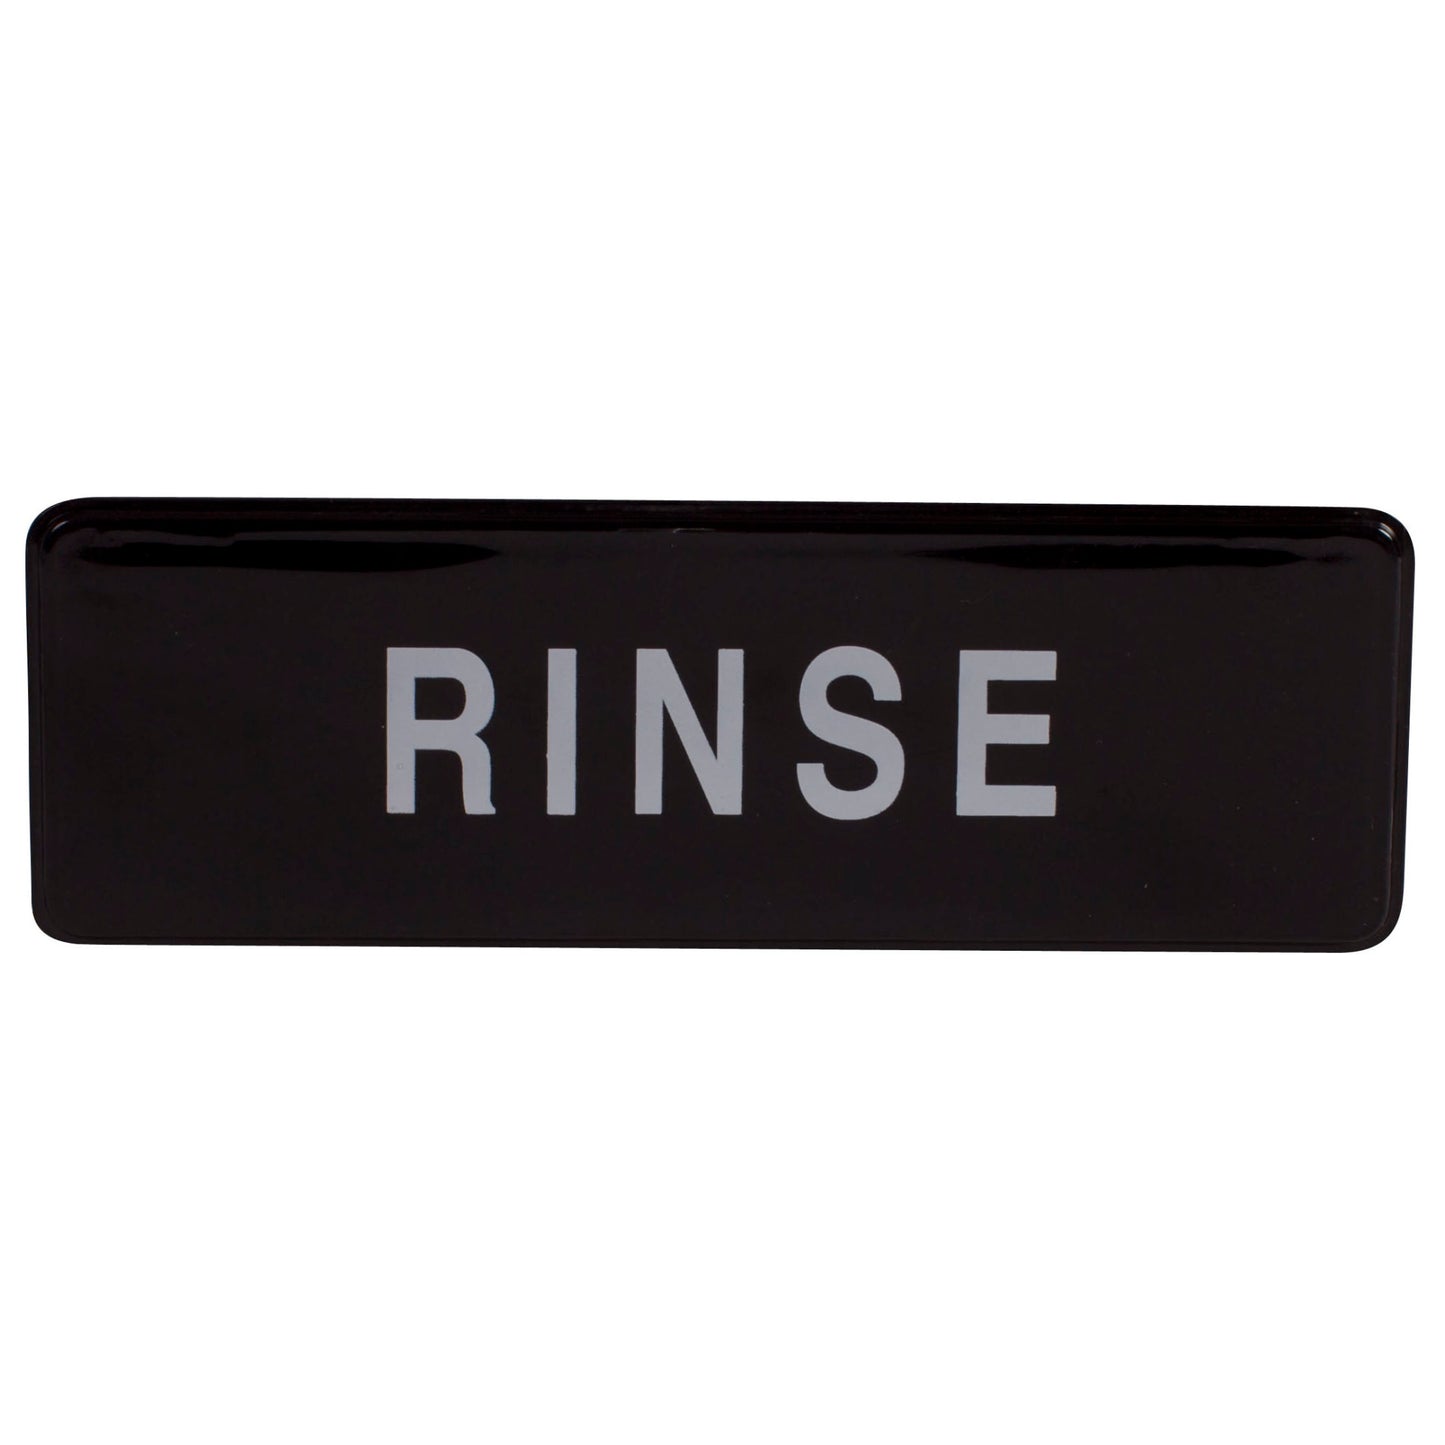 SGN-327 - Information Signs, 9"W x 3"H - SGN-327 - Rinse